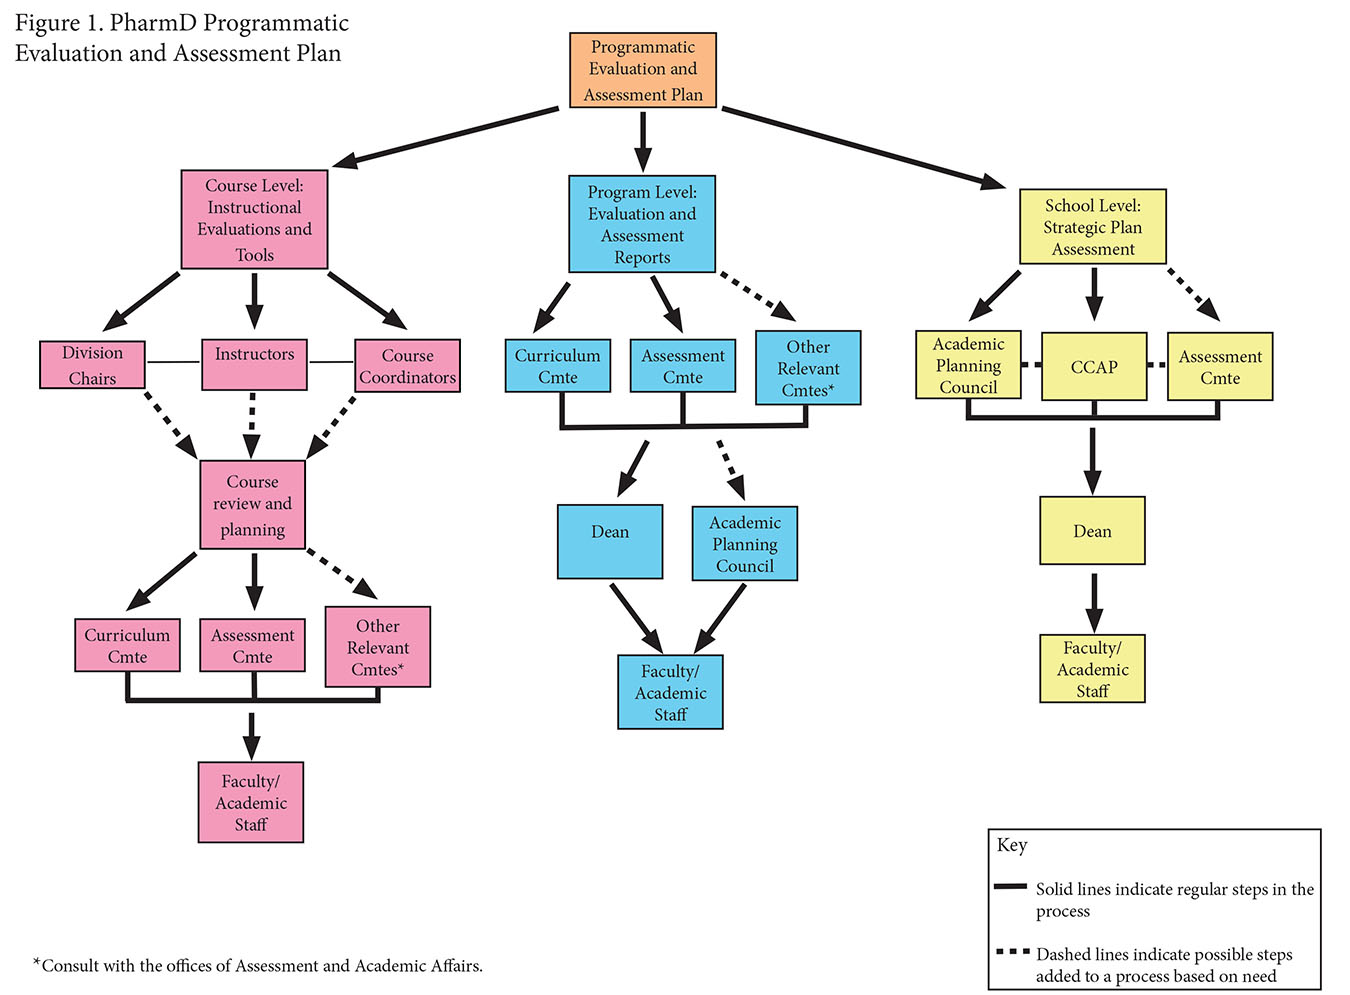 Diagram showing the PharmD programmatic evaluation and assessment plan